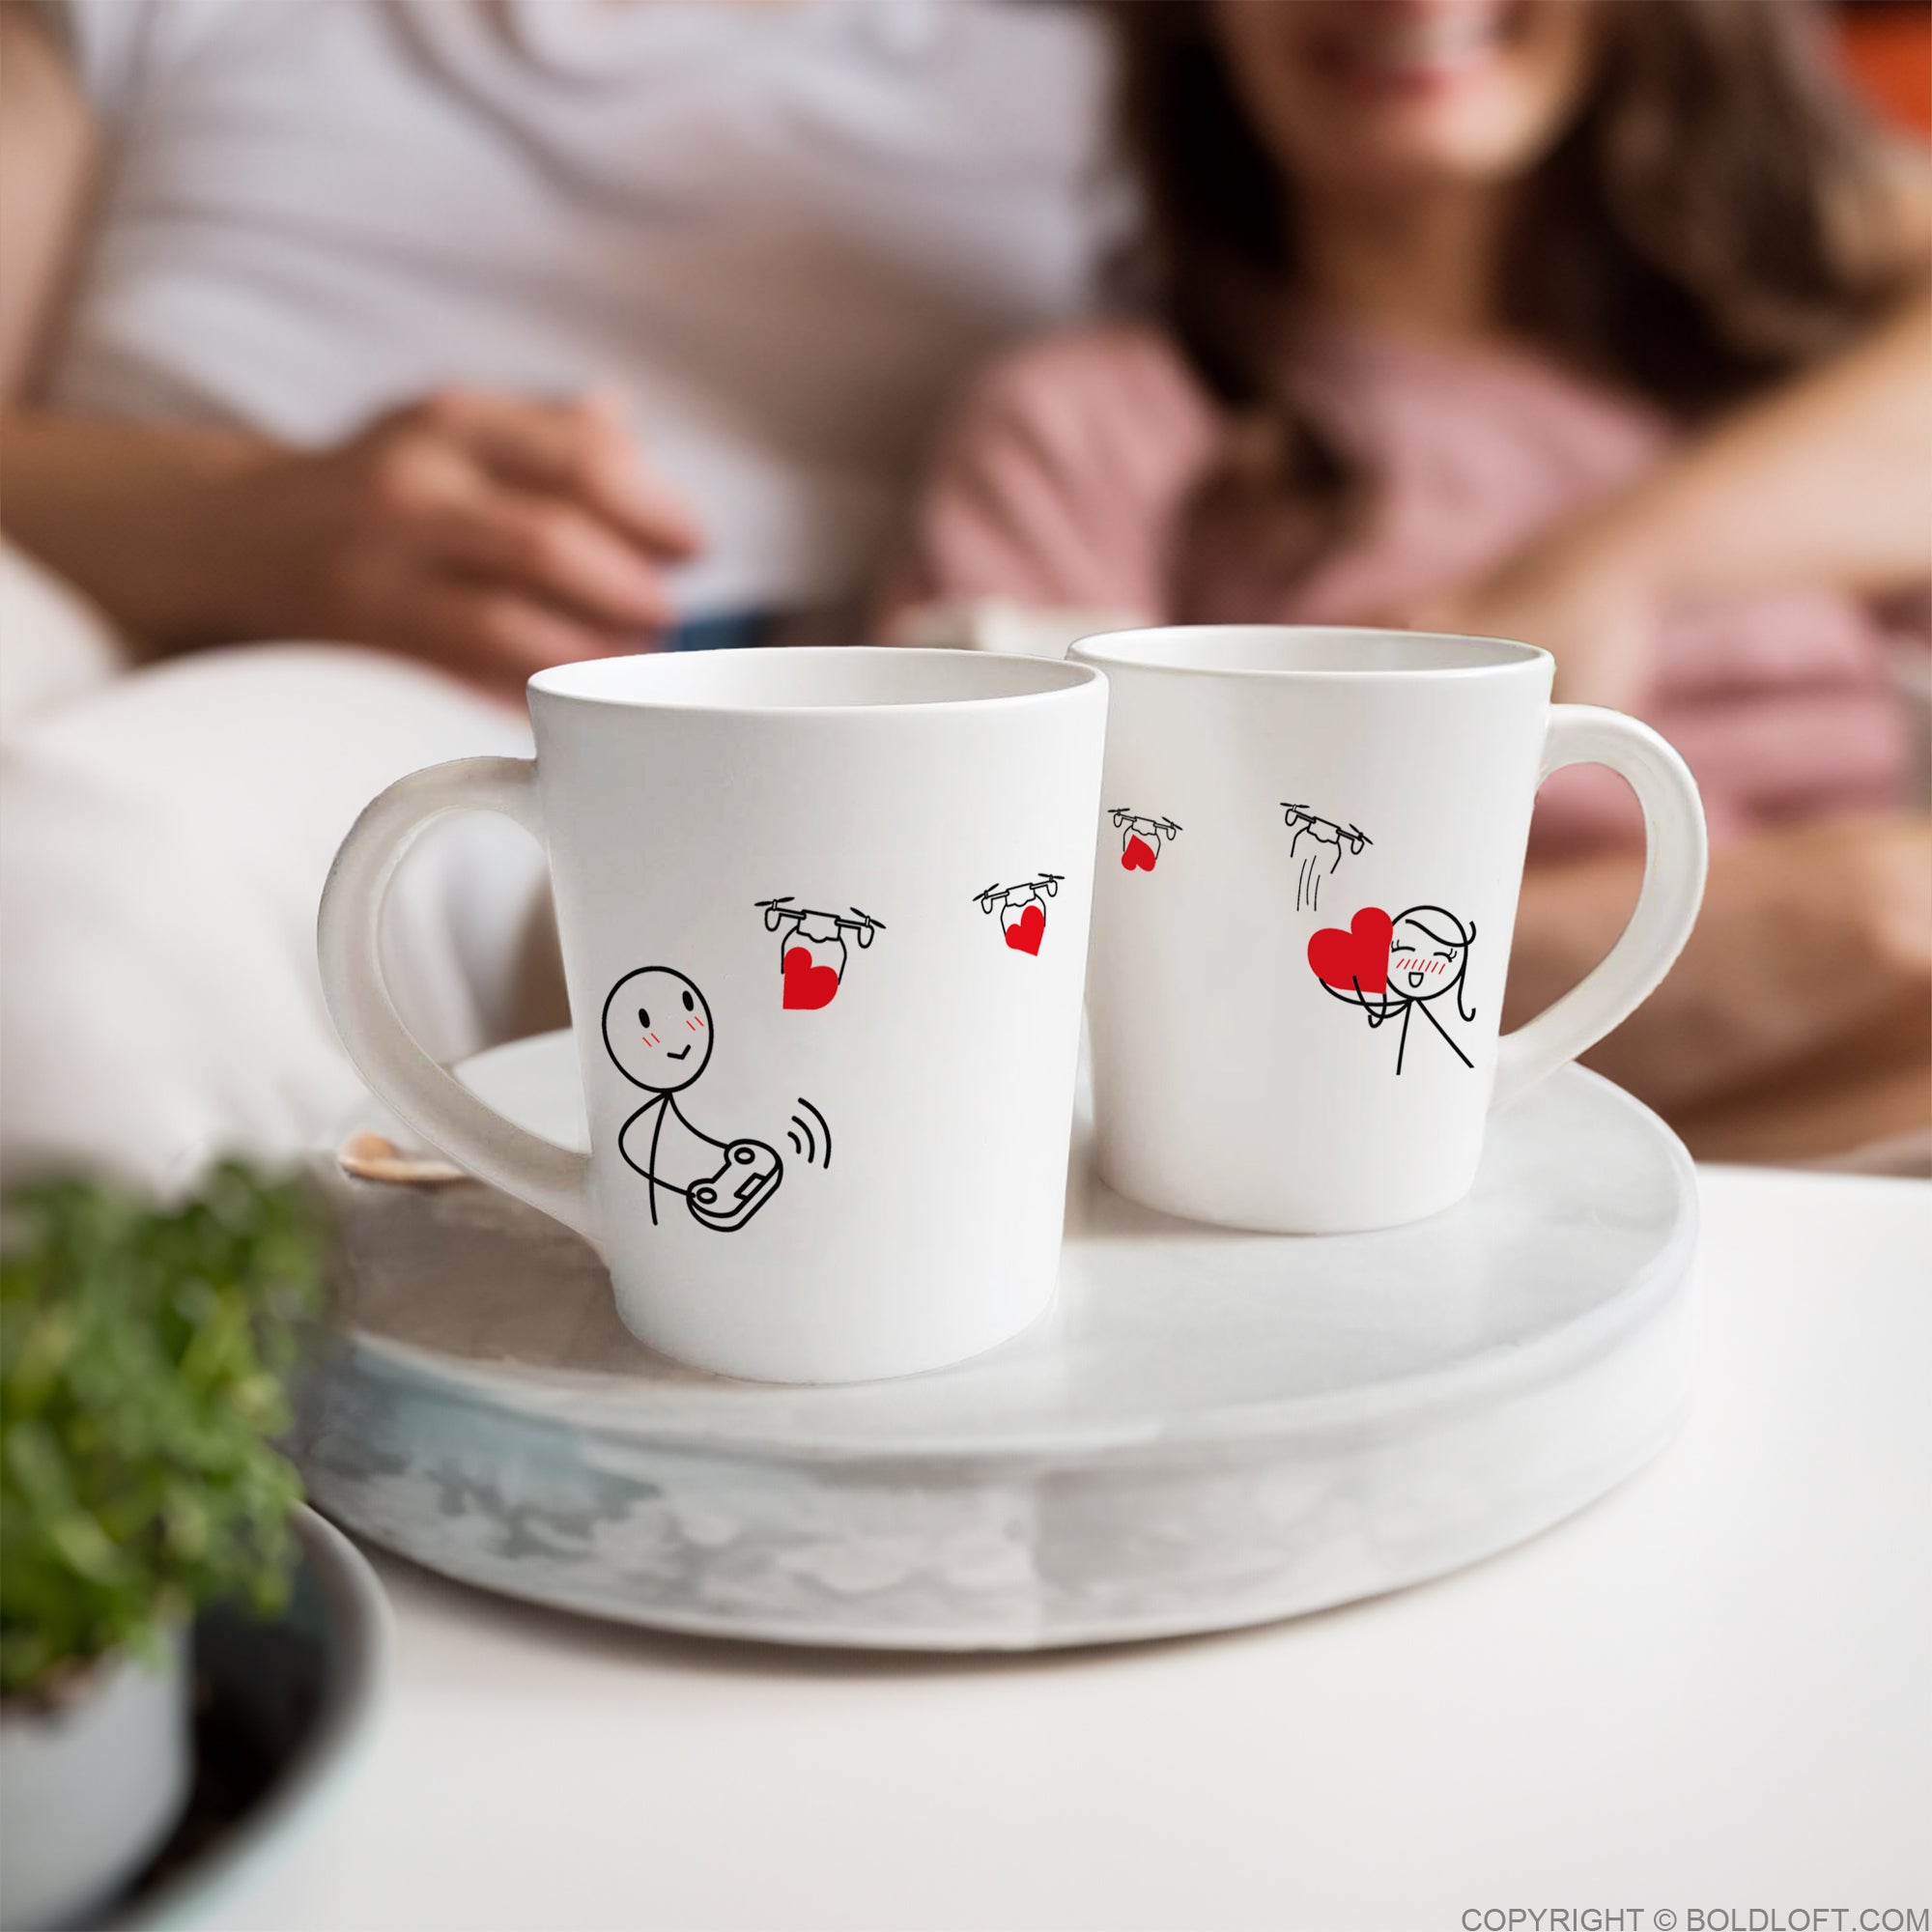 BoldLoft Love is on the Way Couple Mugs. His and Hers mugs showcase a love message and 2 stick figures